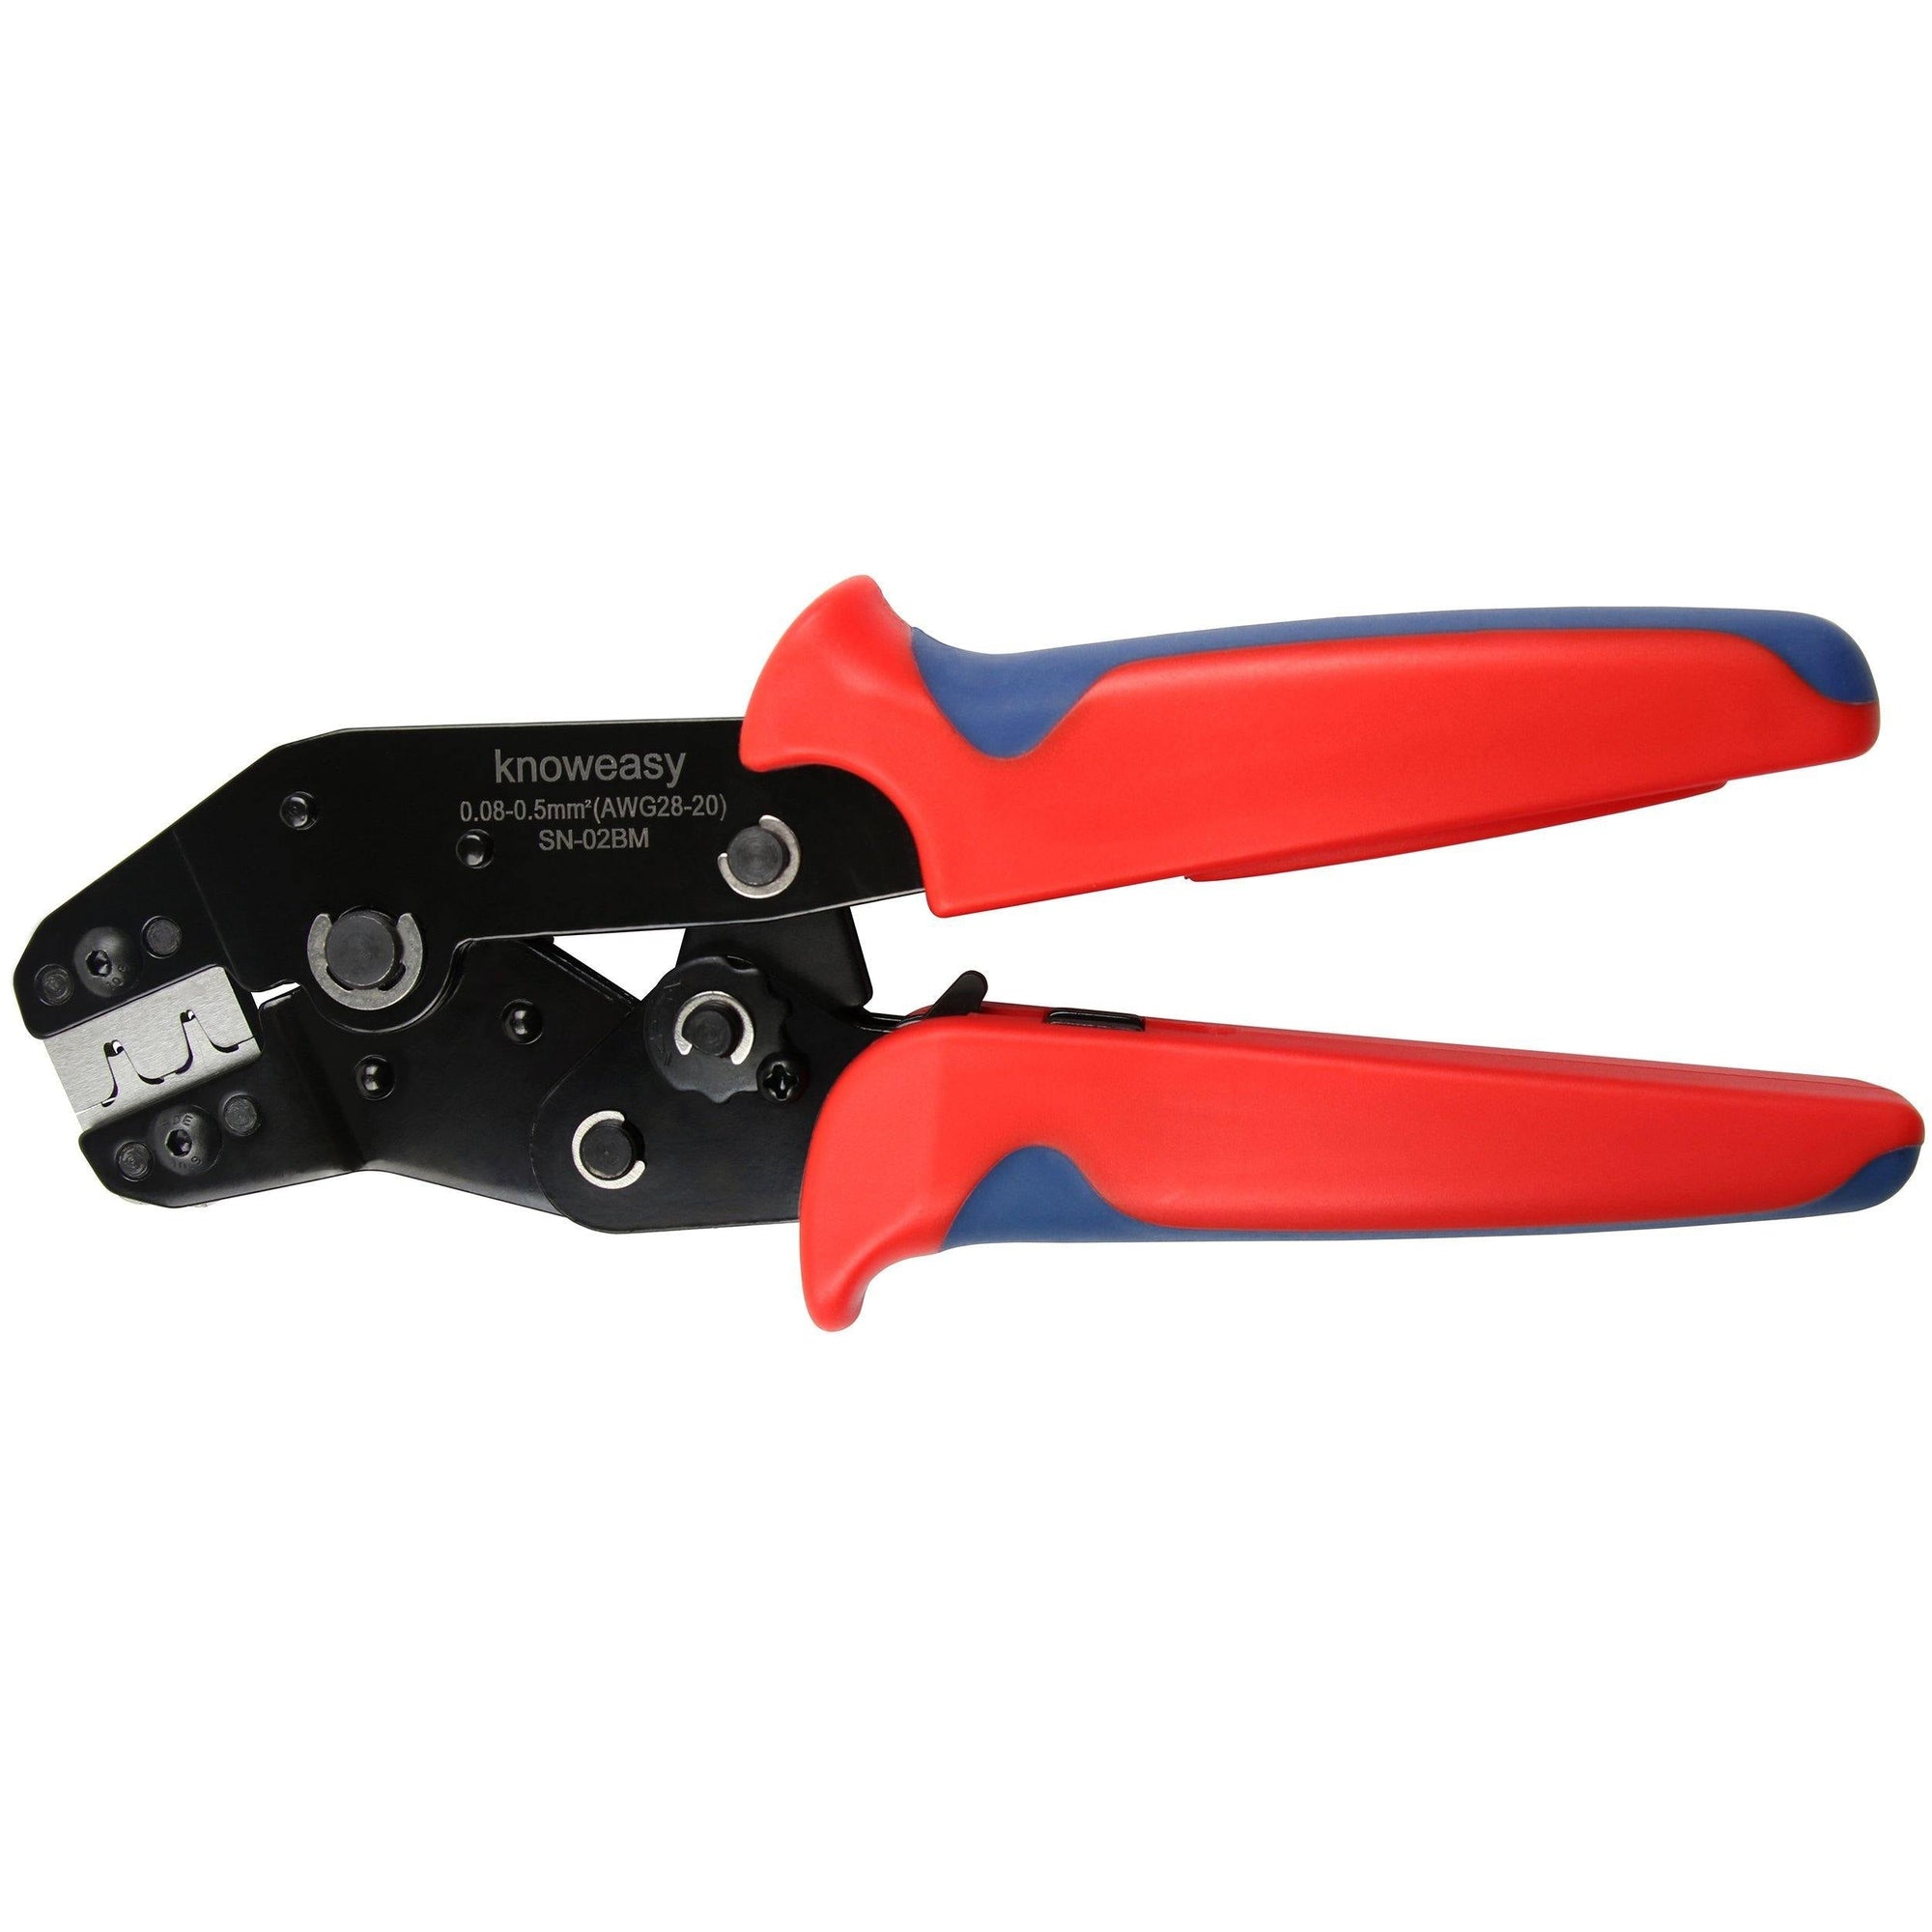 Cable Cutter,Knoweasy Heavy Duty Aluminum Copper Ratchet Cable Cutter, -  knoweasy